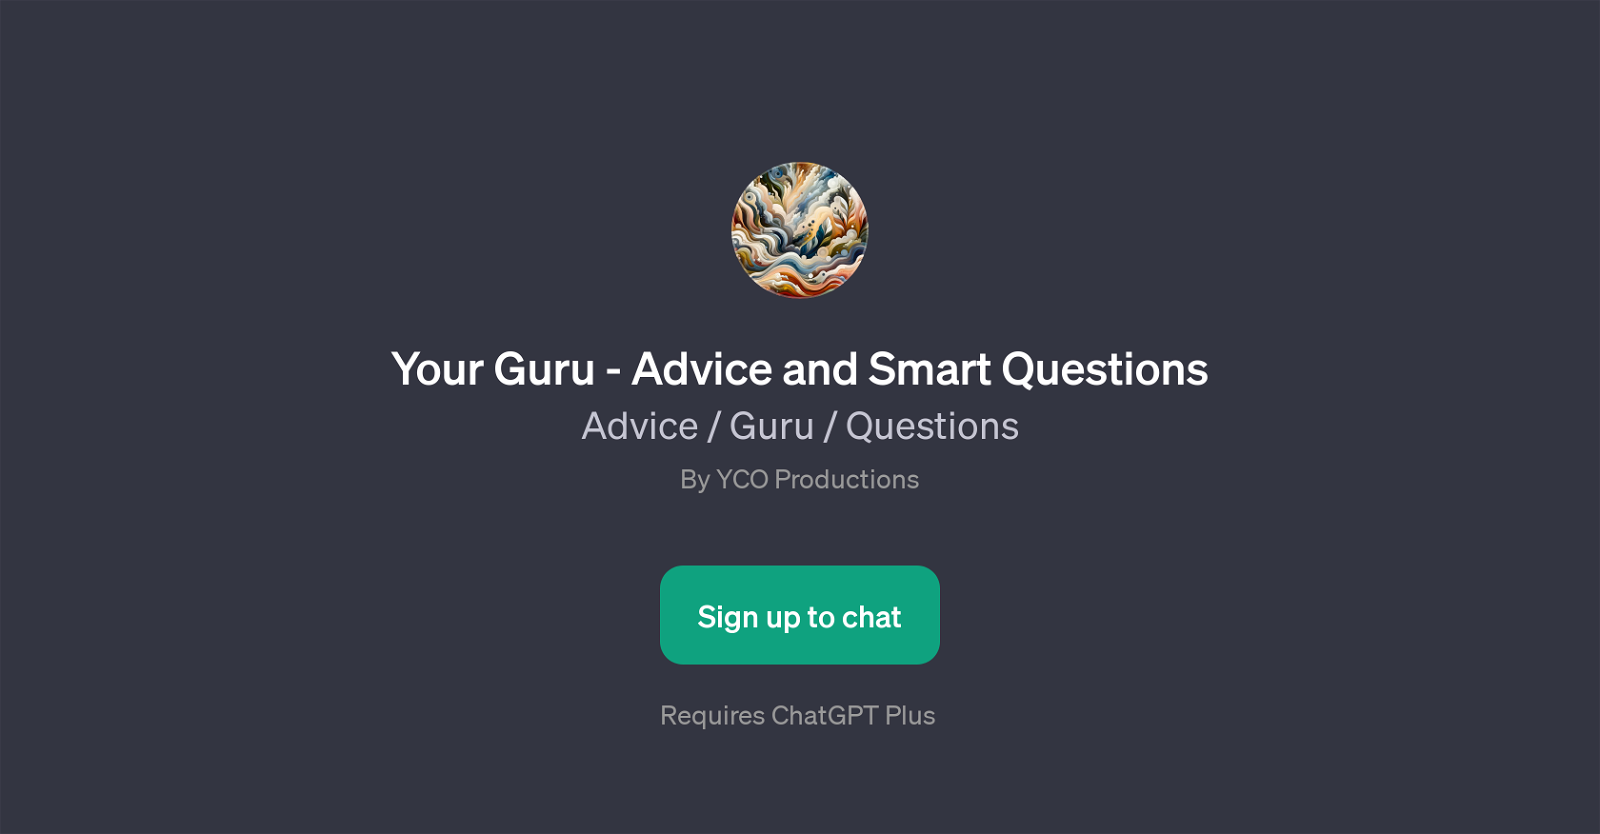 Your Guru - Advice and Smart Questions website